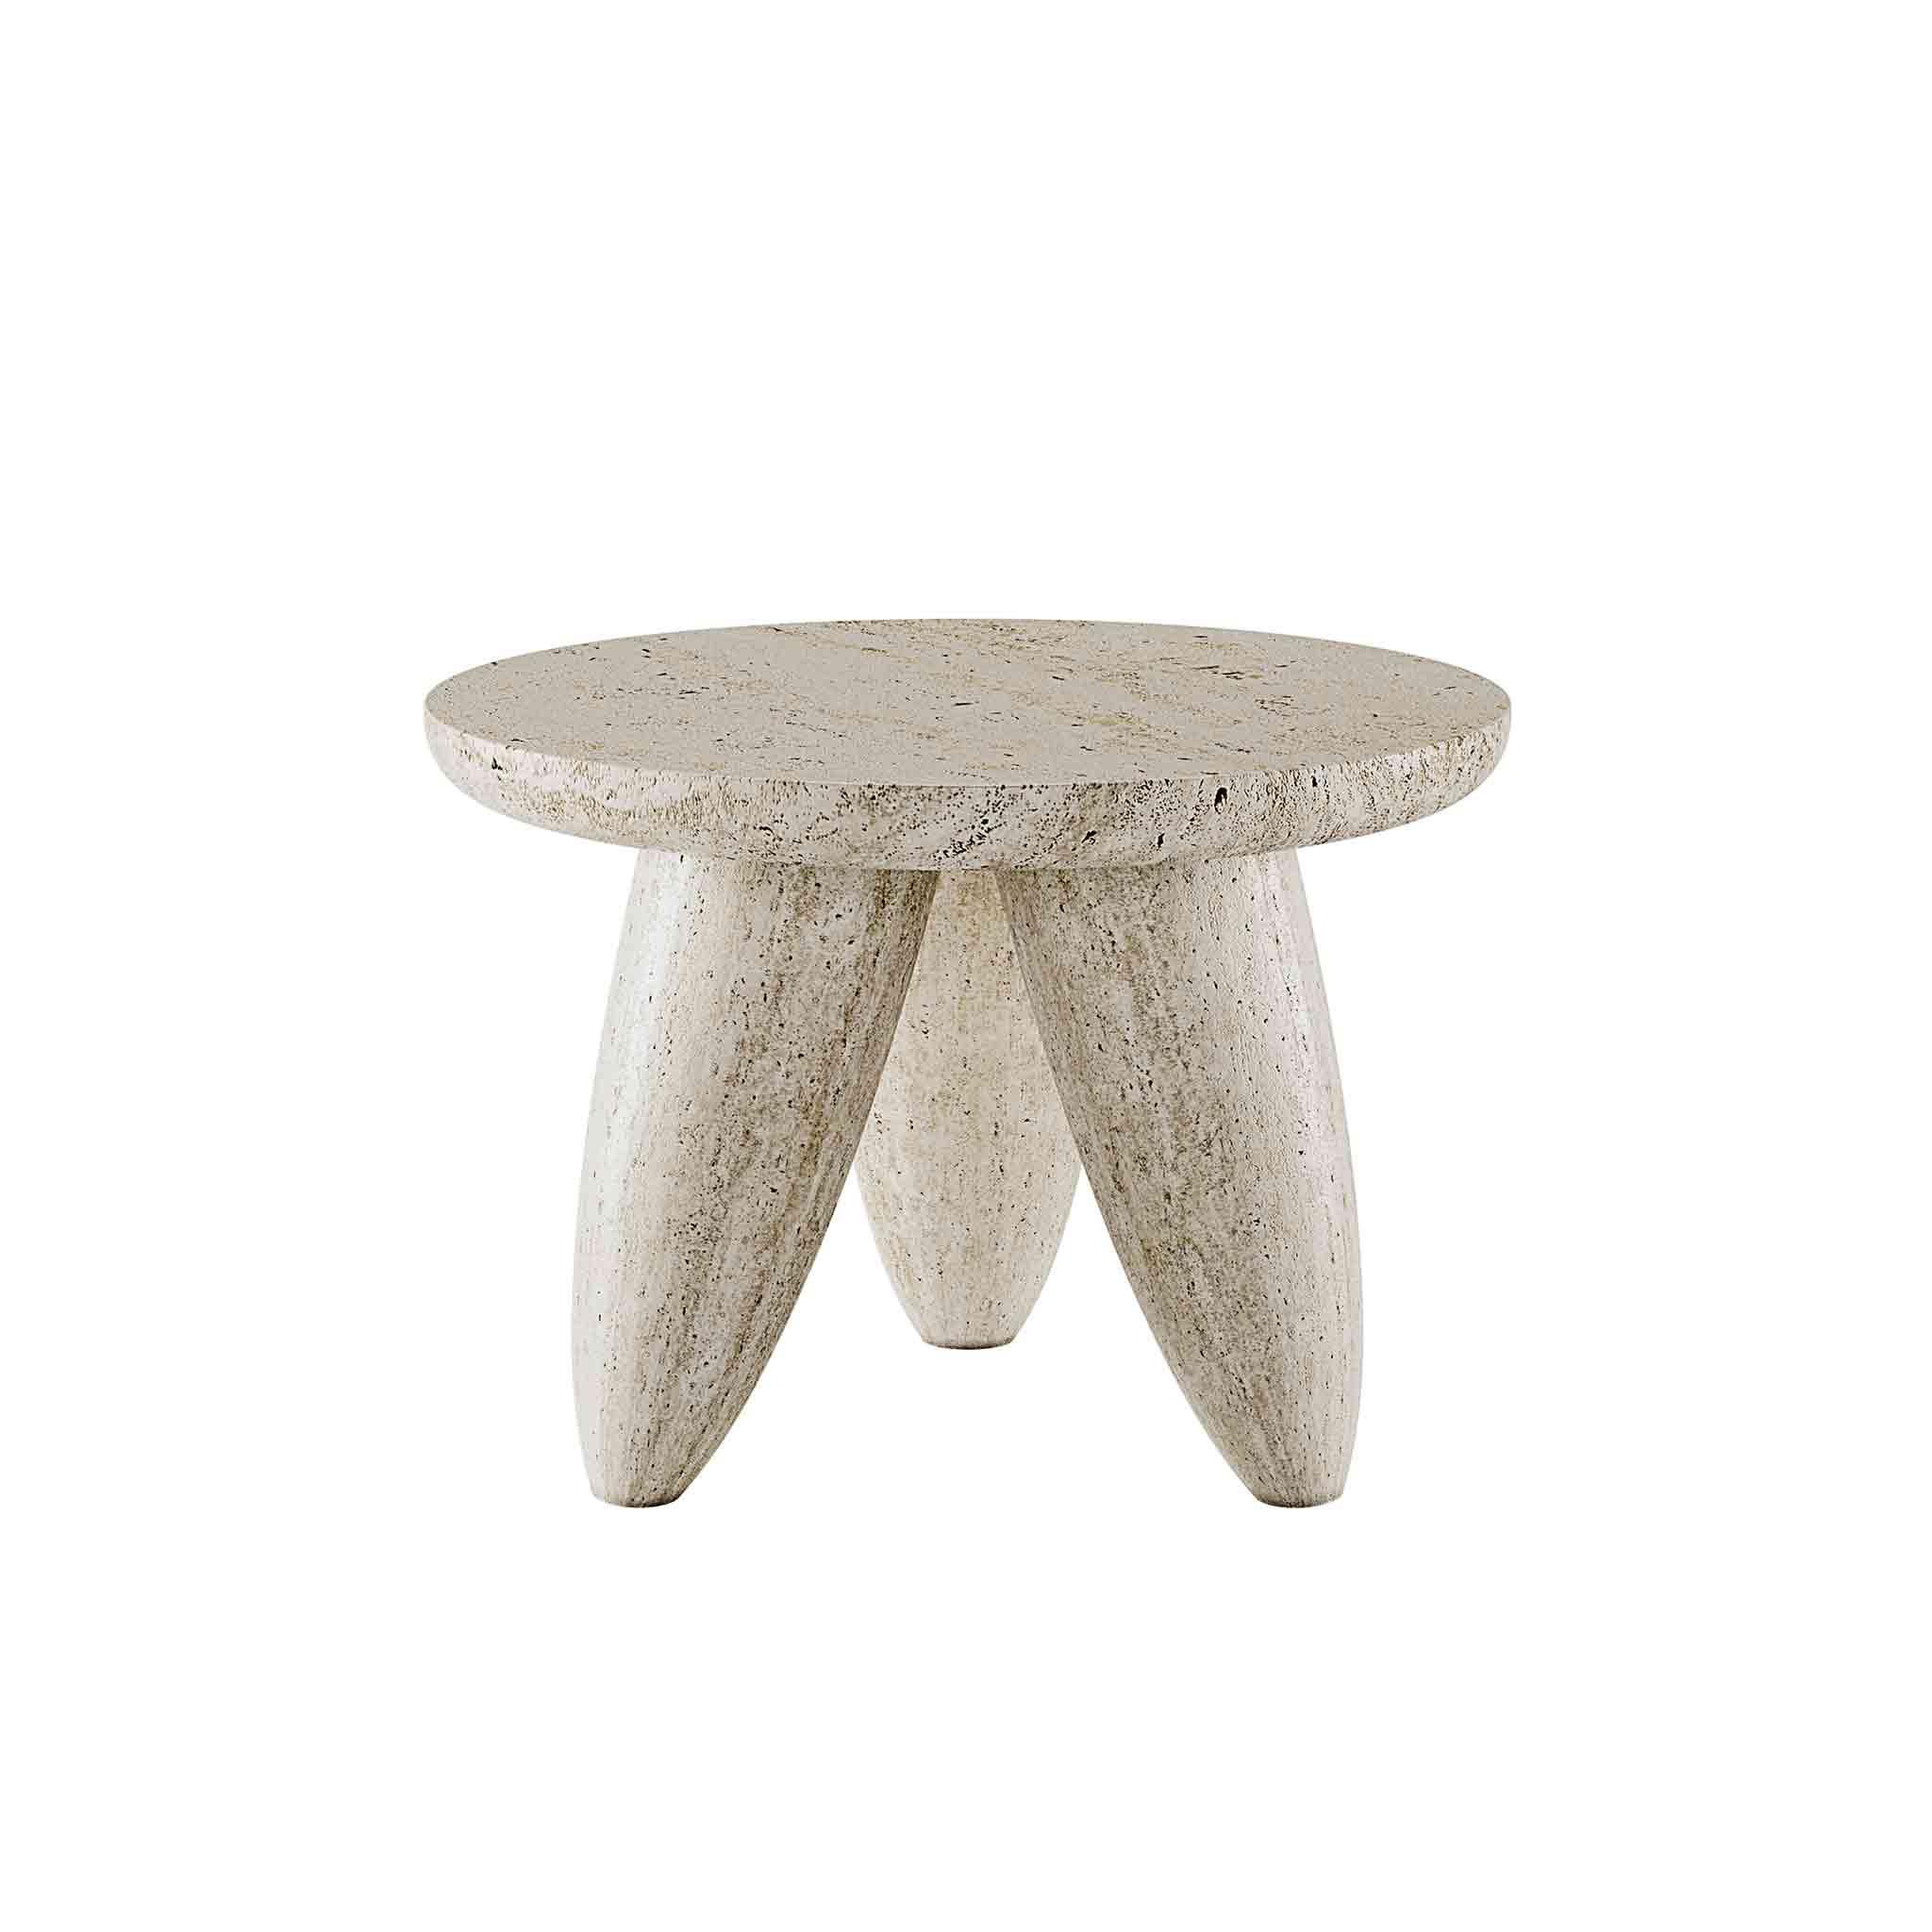 Lunarys Medium Side Table is an outstanding modern design piece. A key side table for a contemporary living room project seems to come directly from space. Made in travertine stone is perfect for indoor or outdoor projects.

Materials: Body in